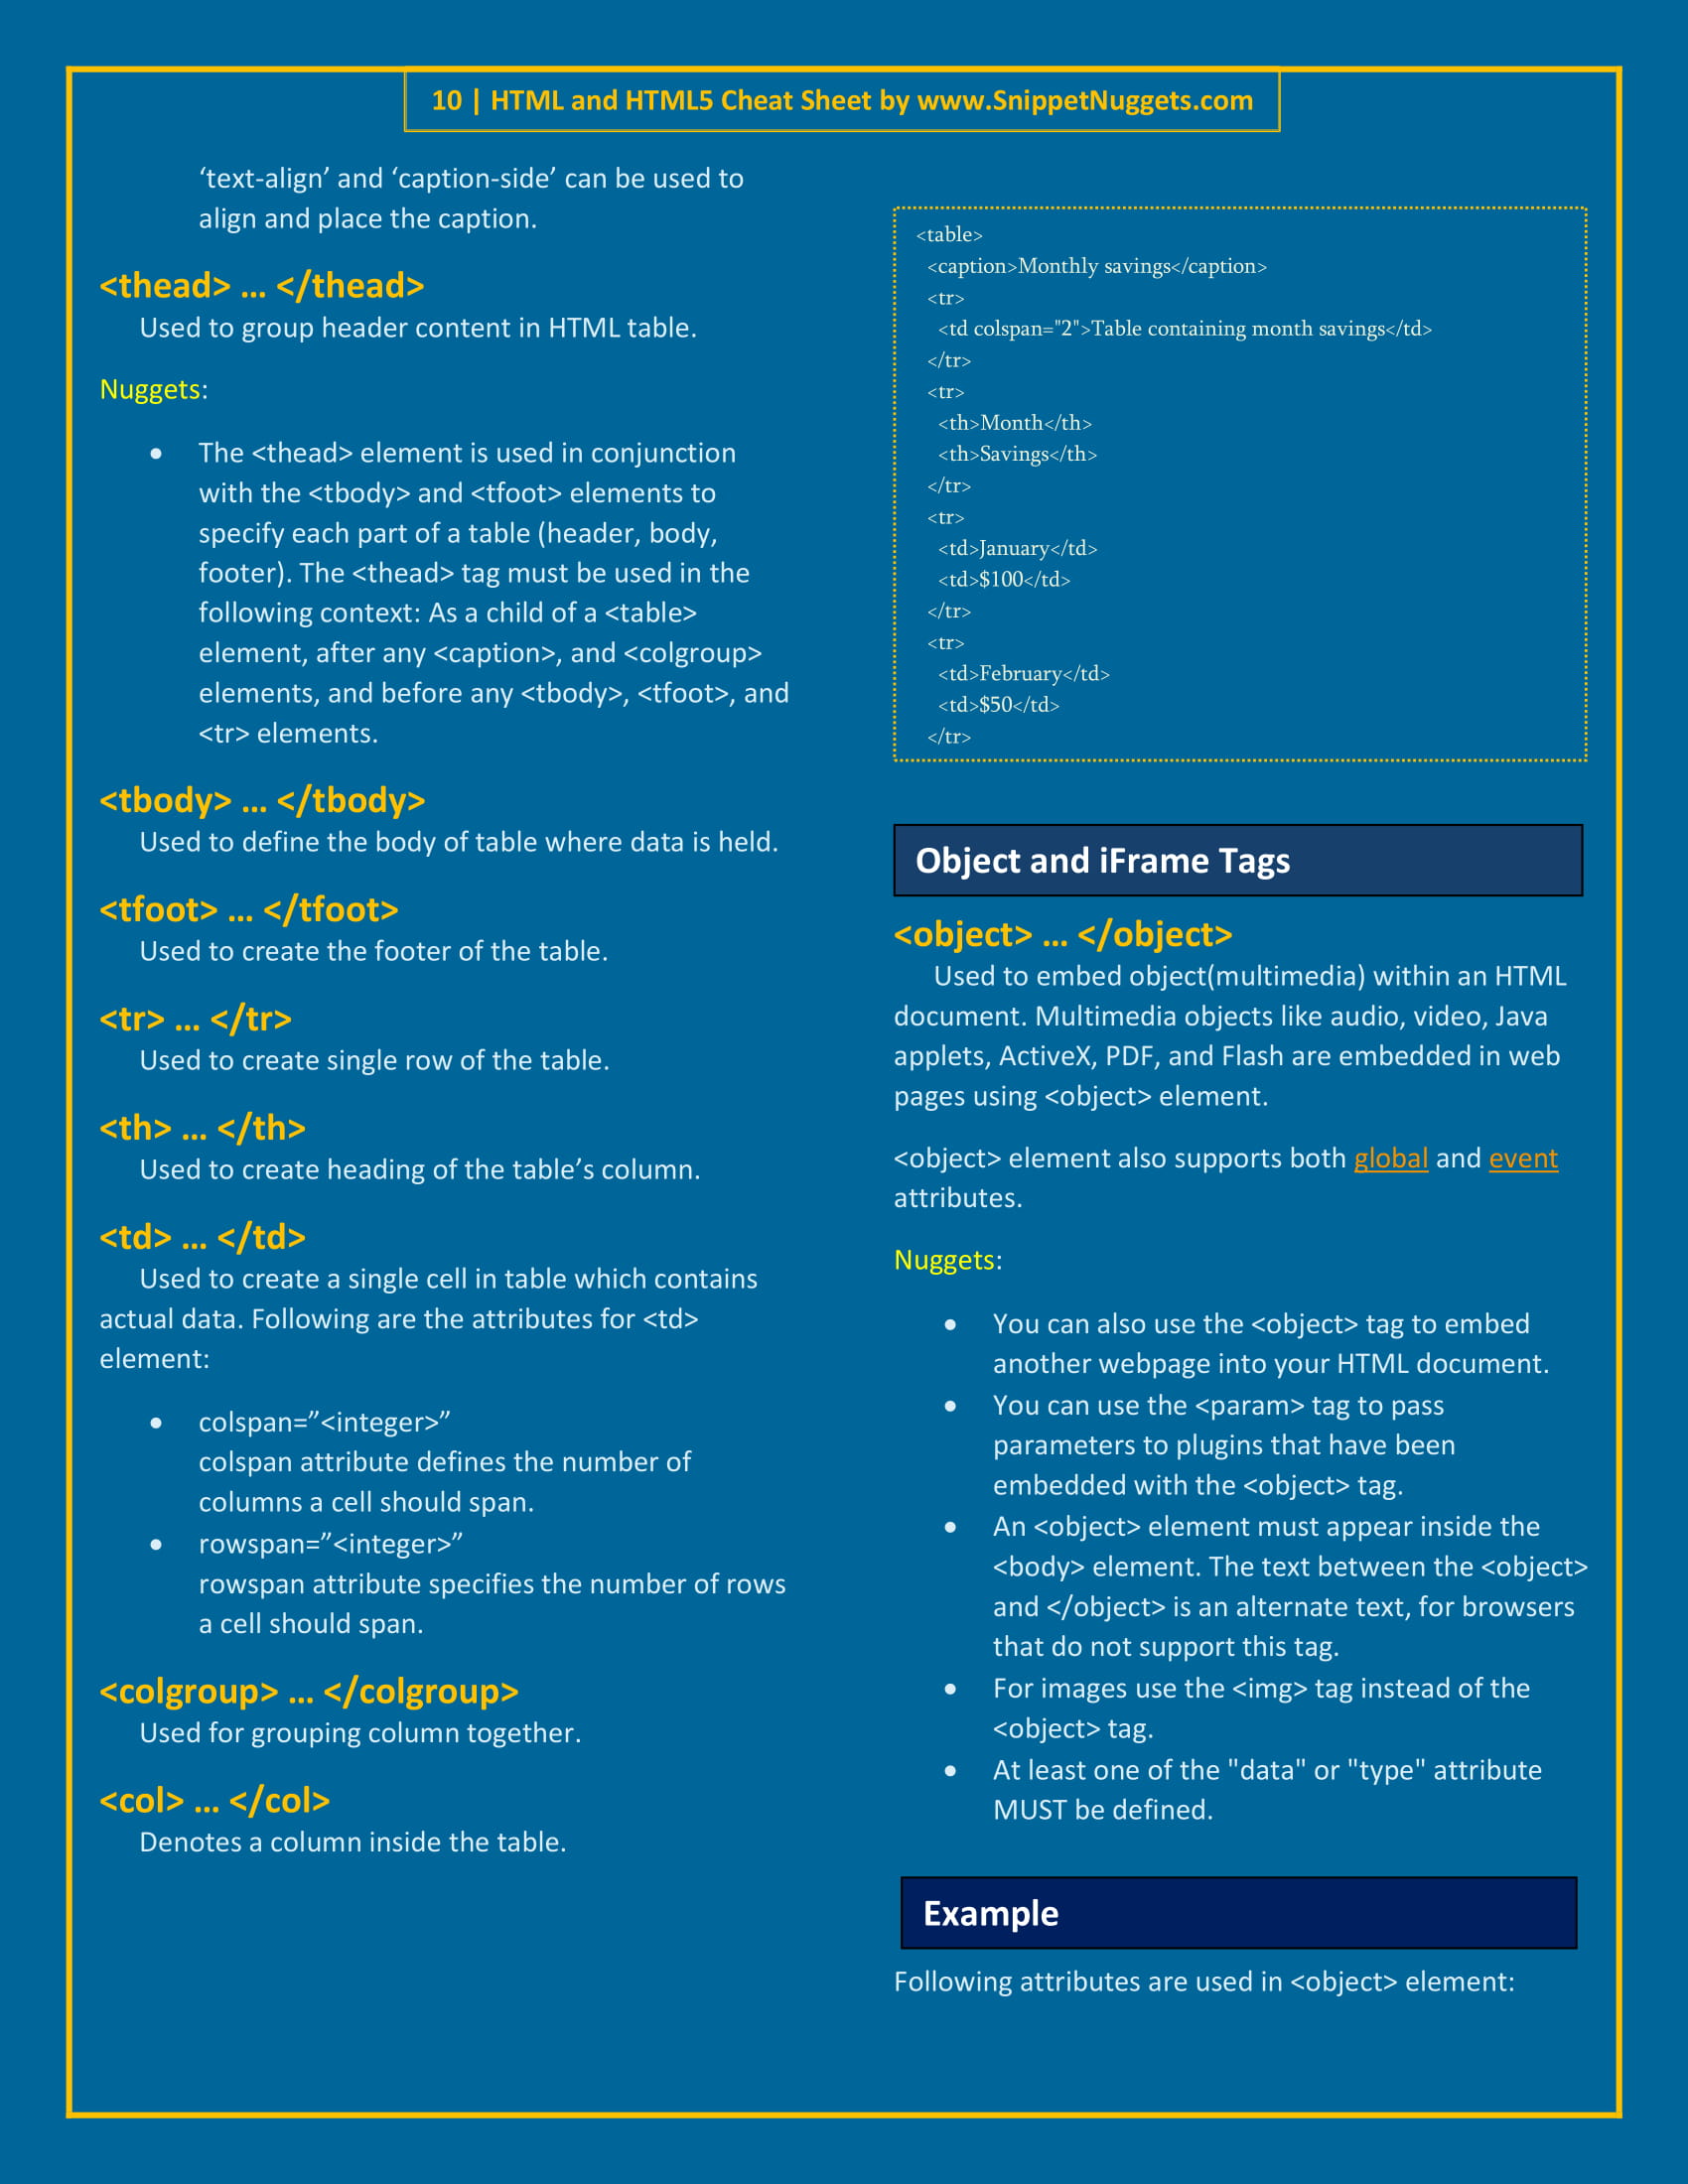 html cheat sheet for 2019 table tag thead tbody tfoot tr th td object iframe www.snippetnuggets.com